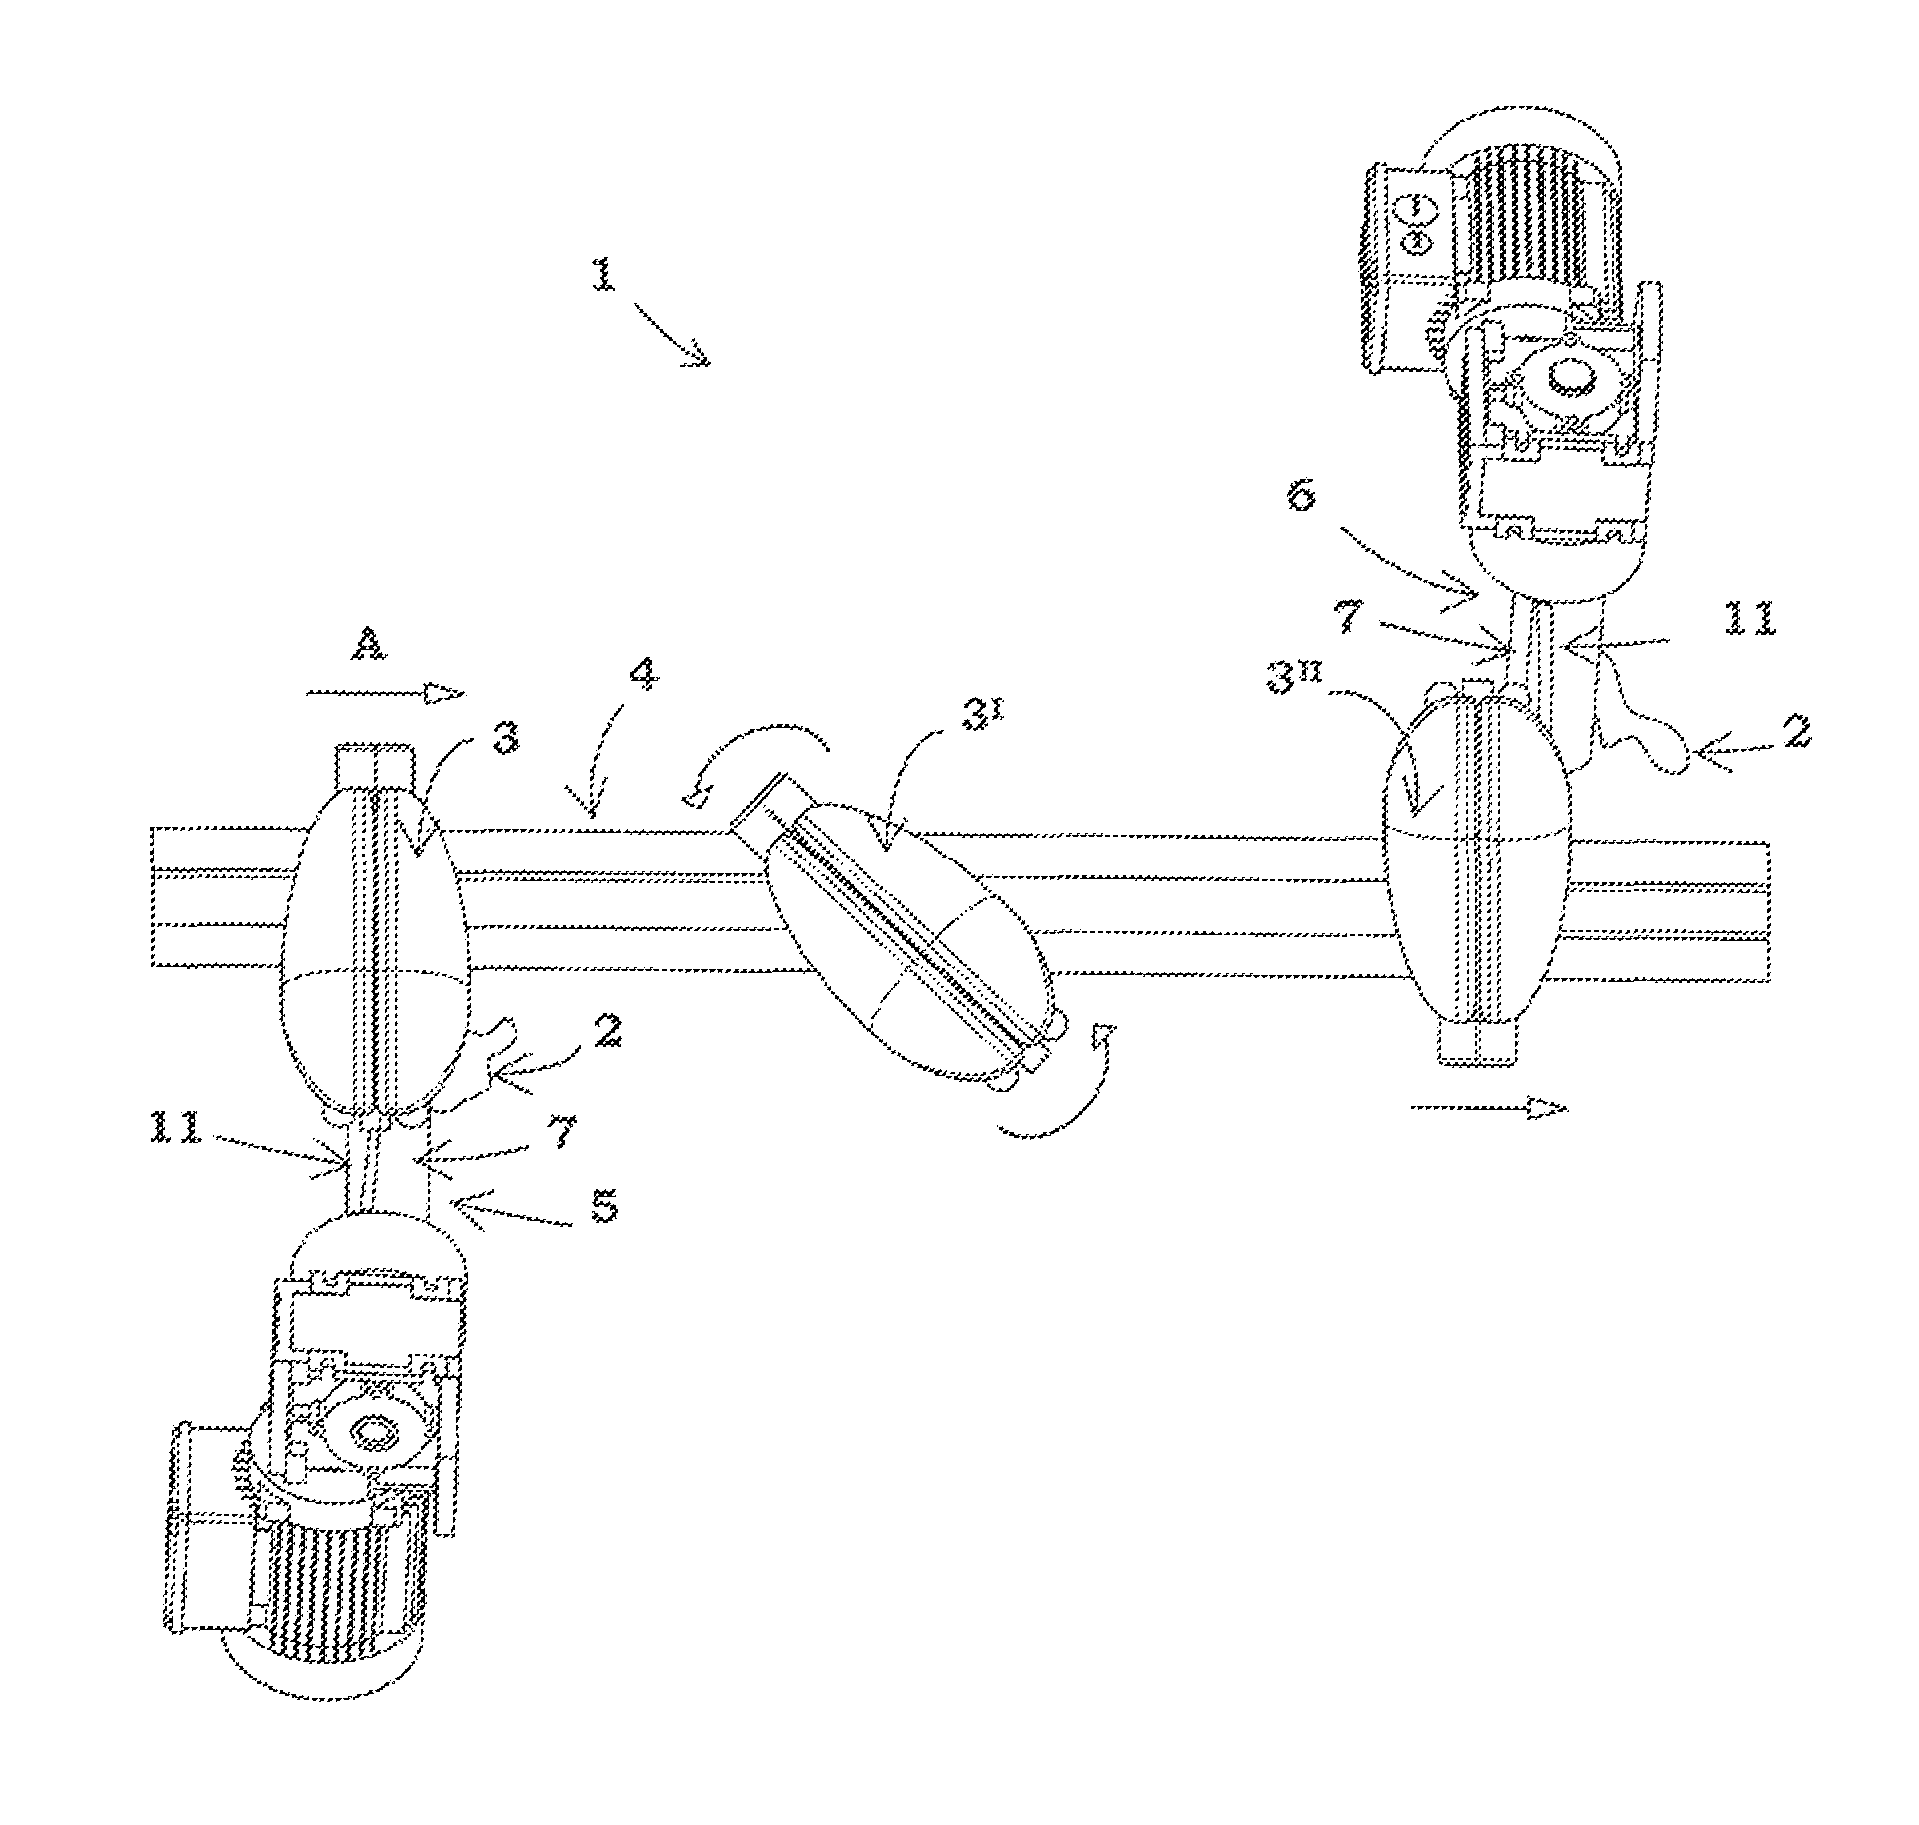 Poultry processing device and method for poultry processing